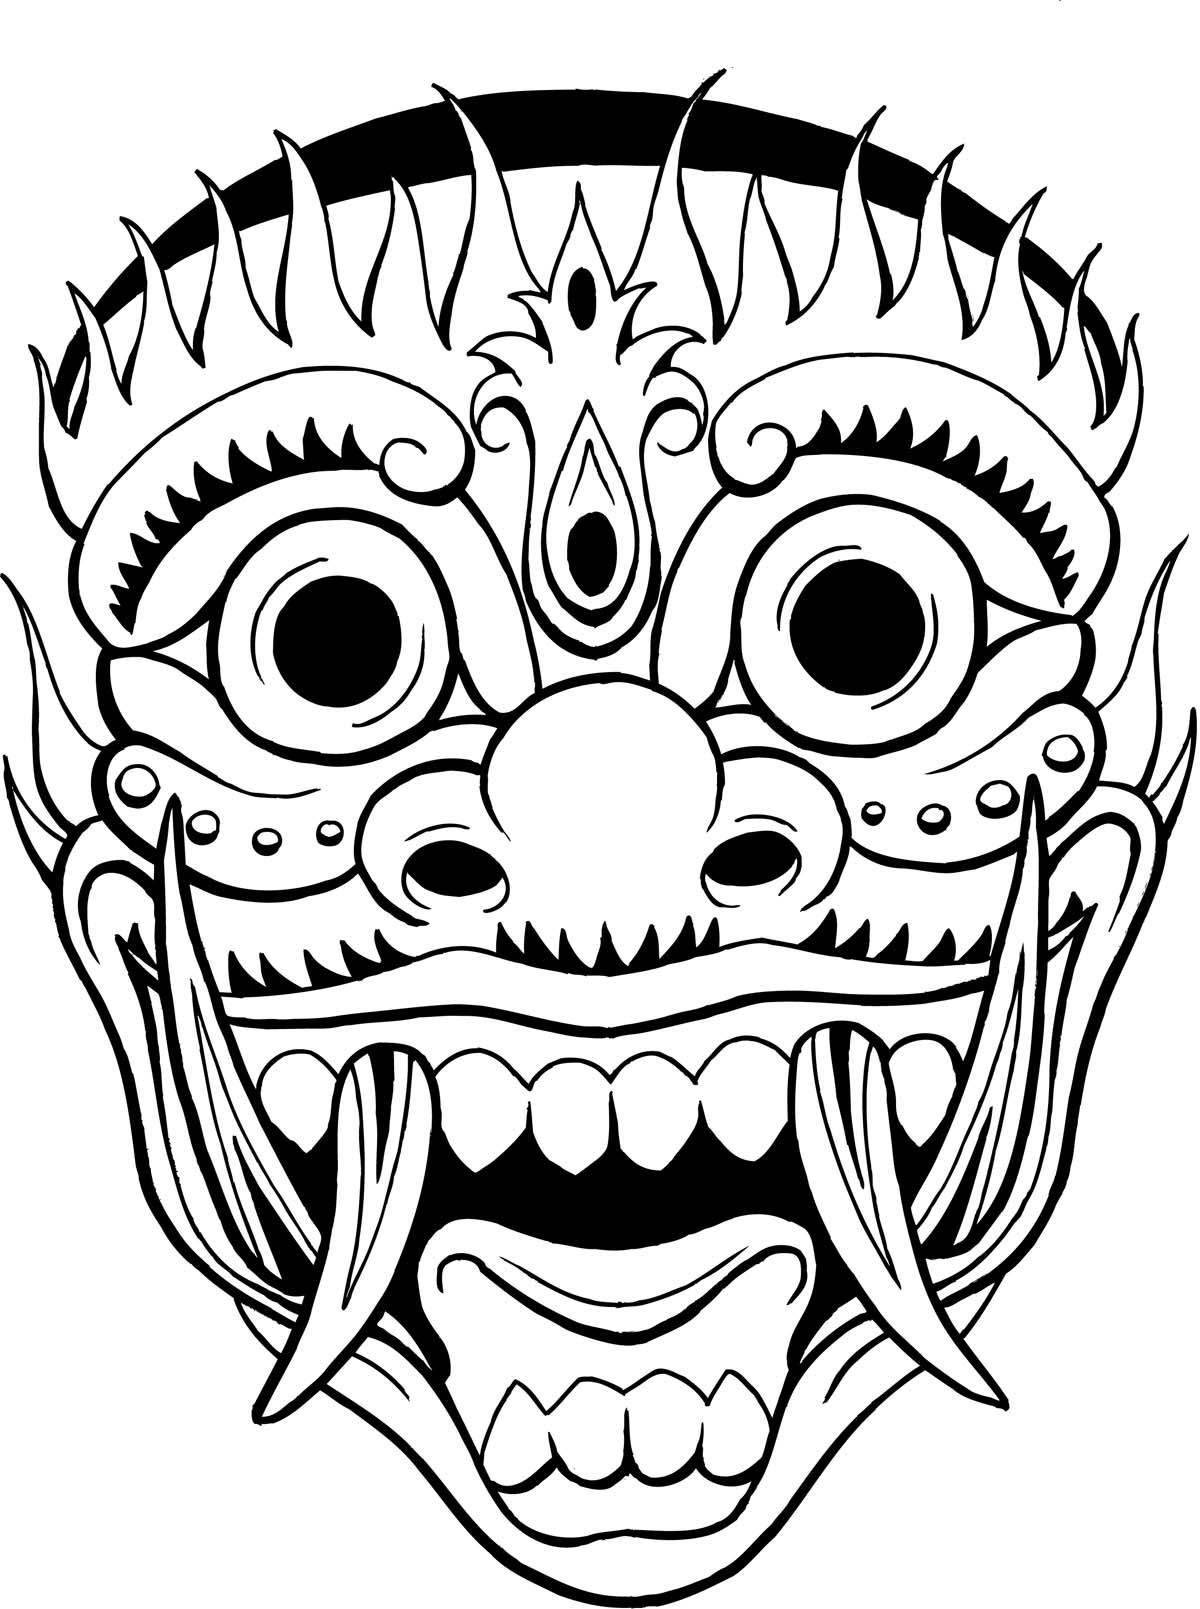 Horrible scary face coloring page